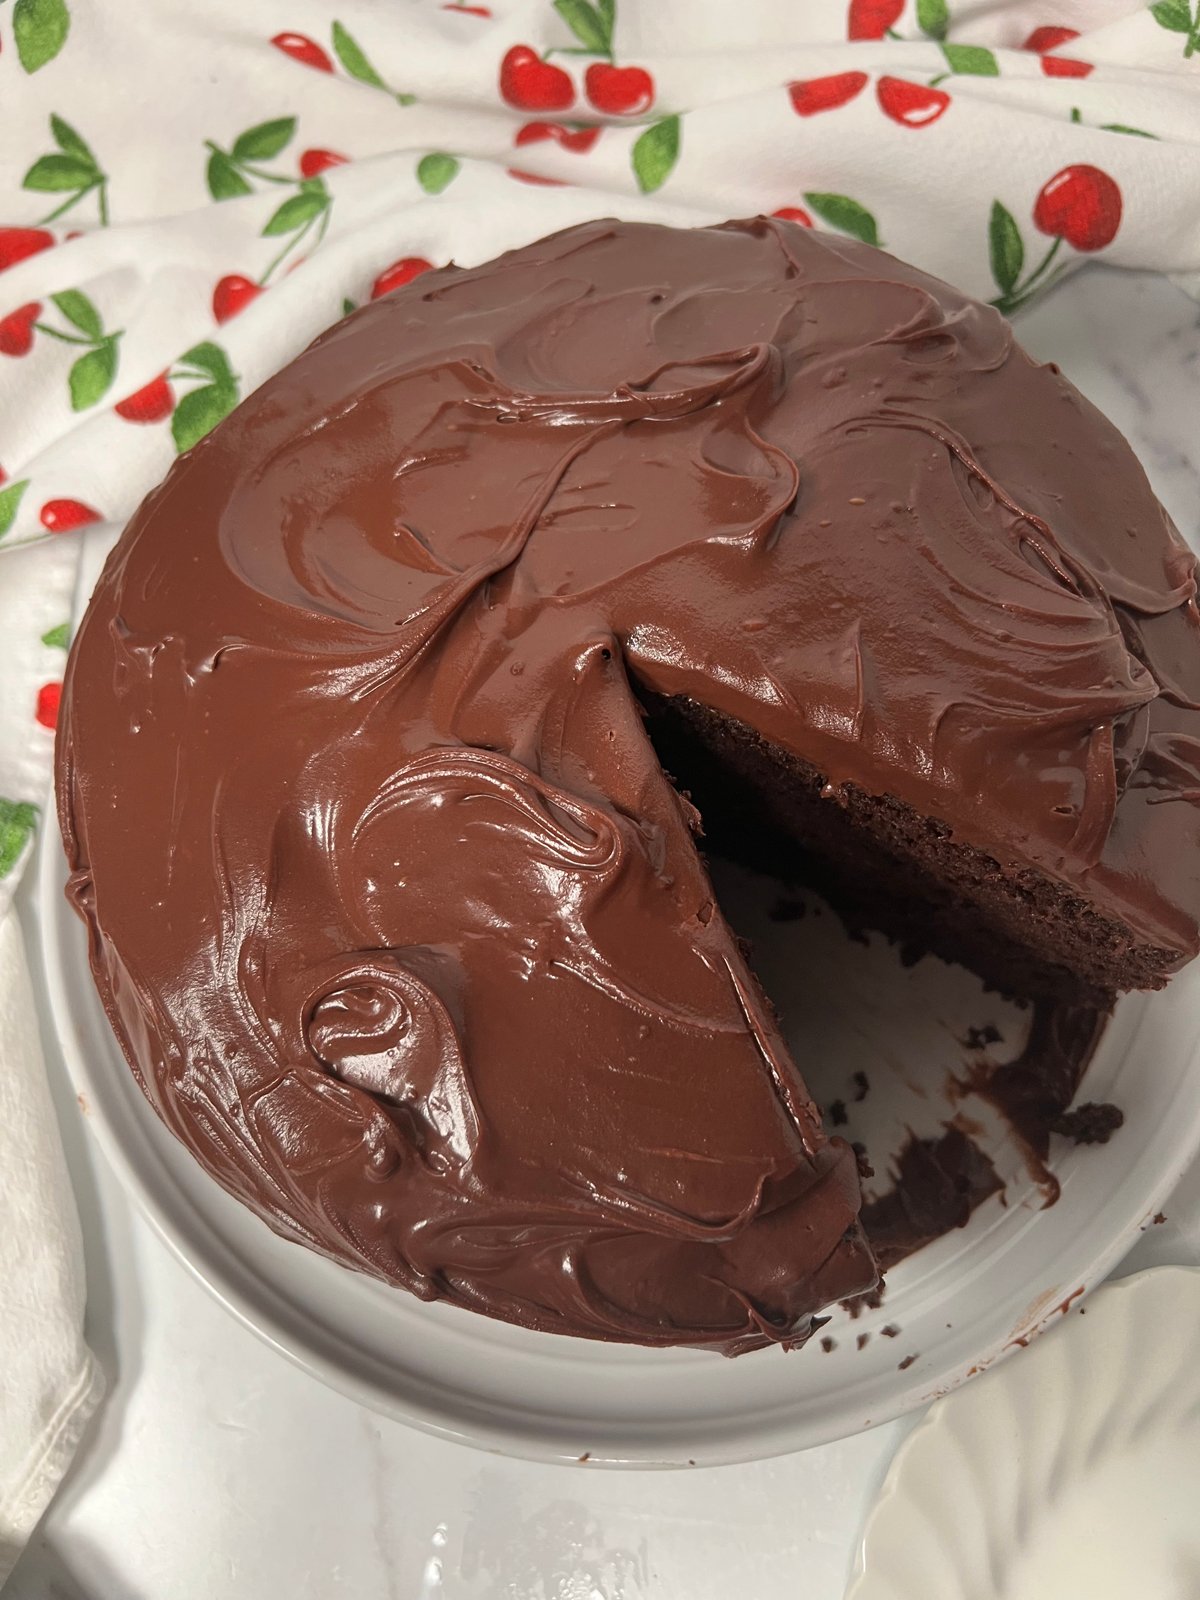 The best chocolate cake that is also gluten free.